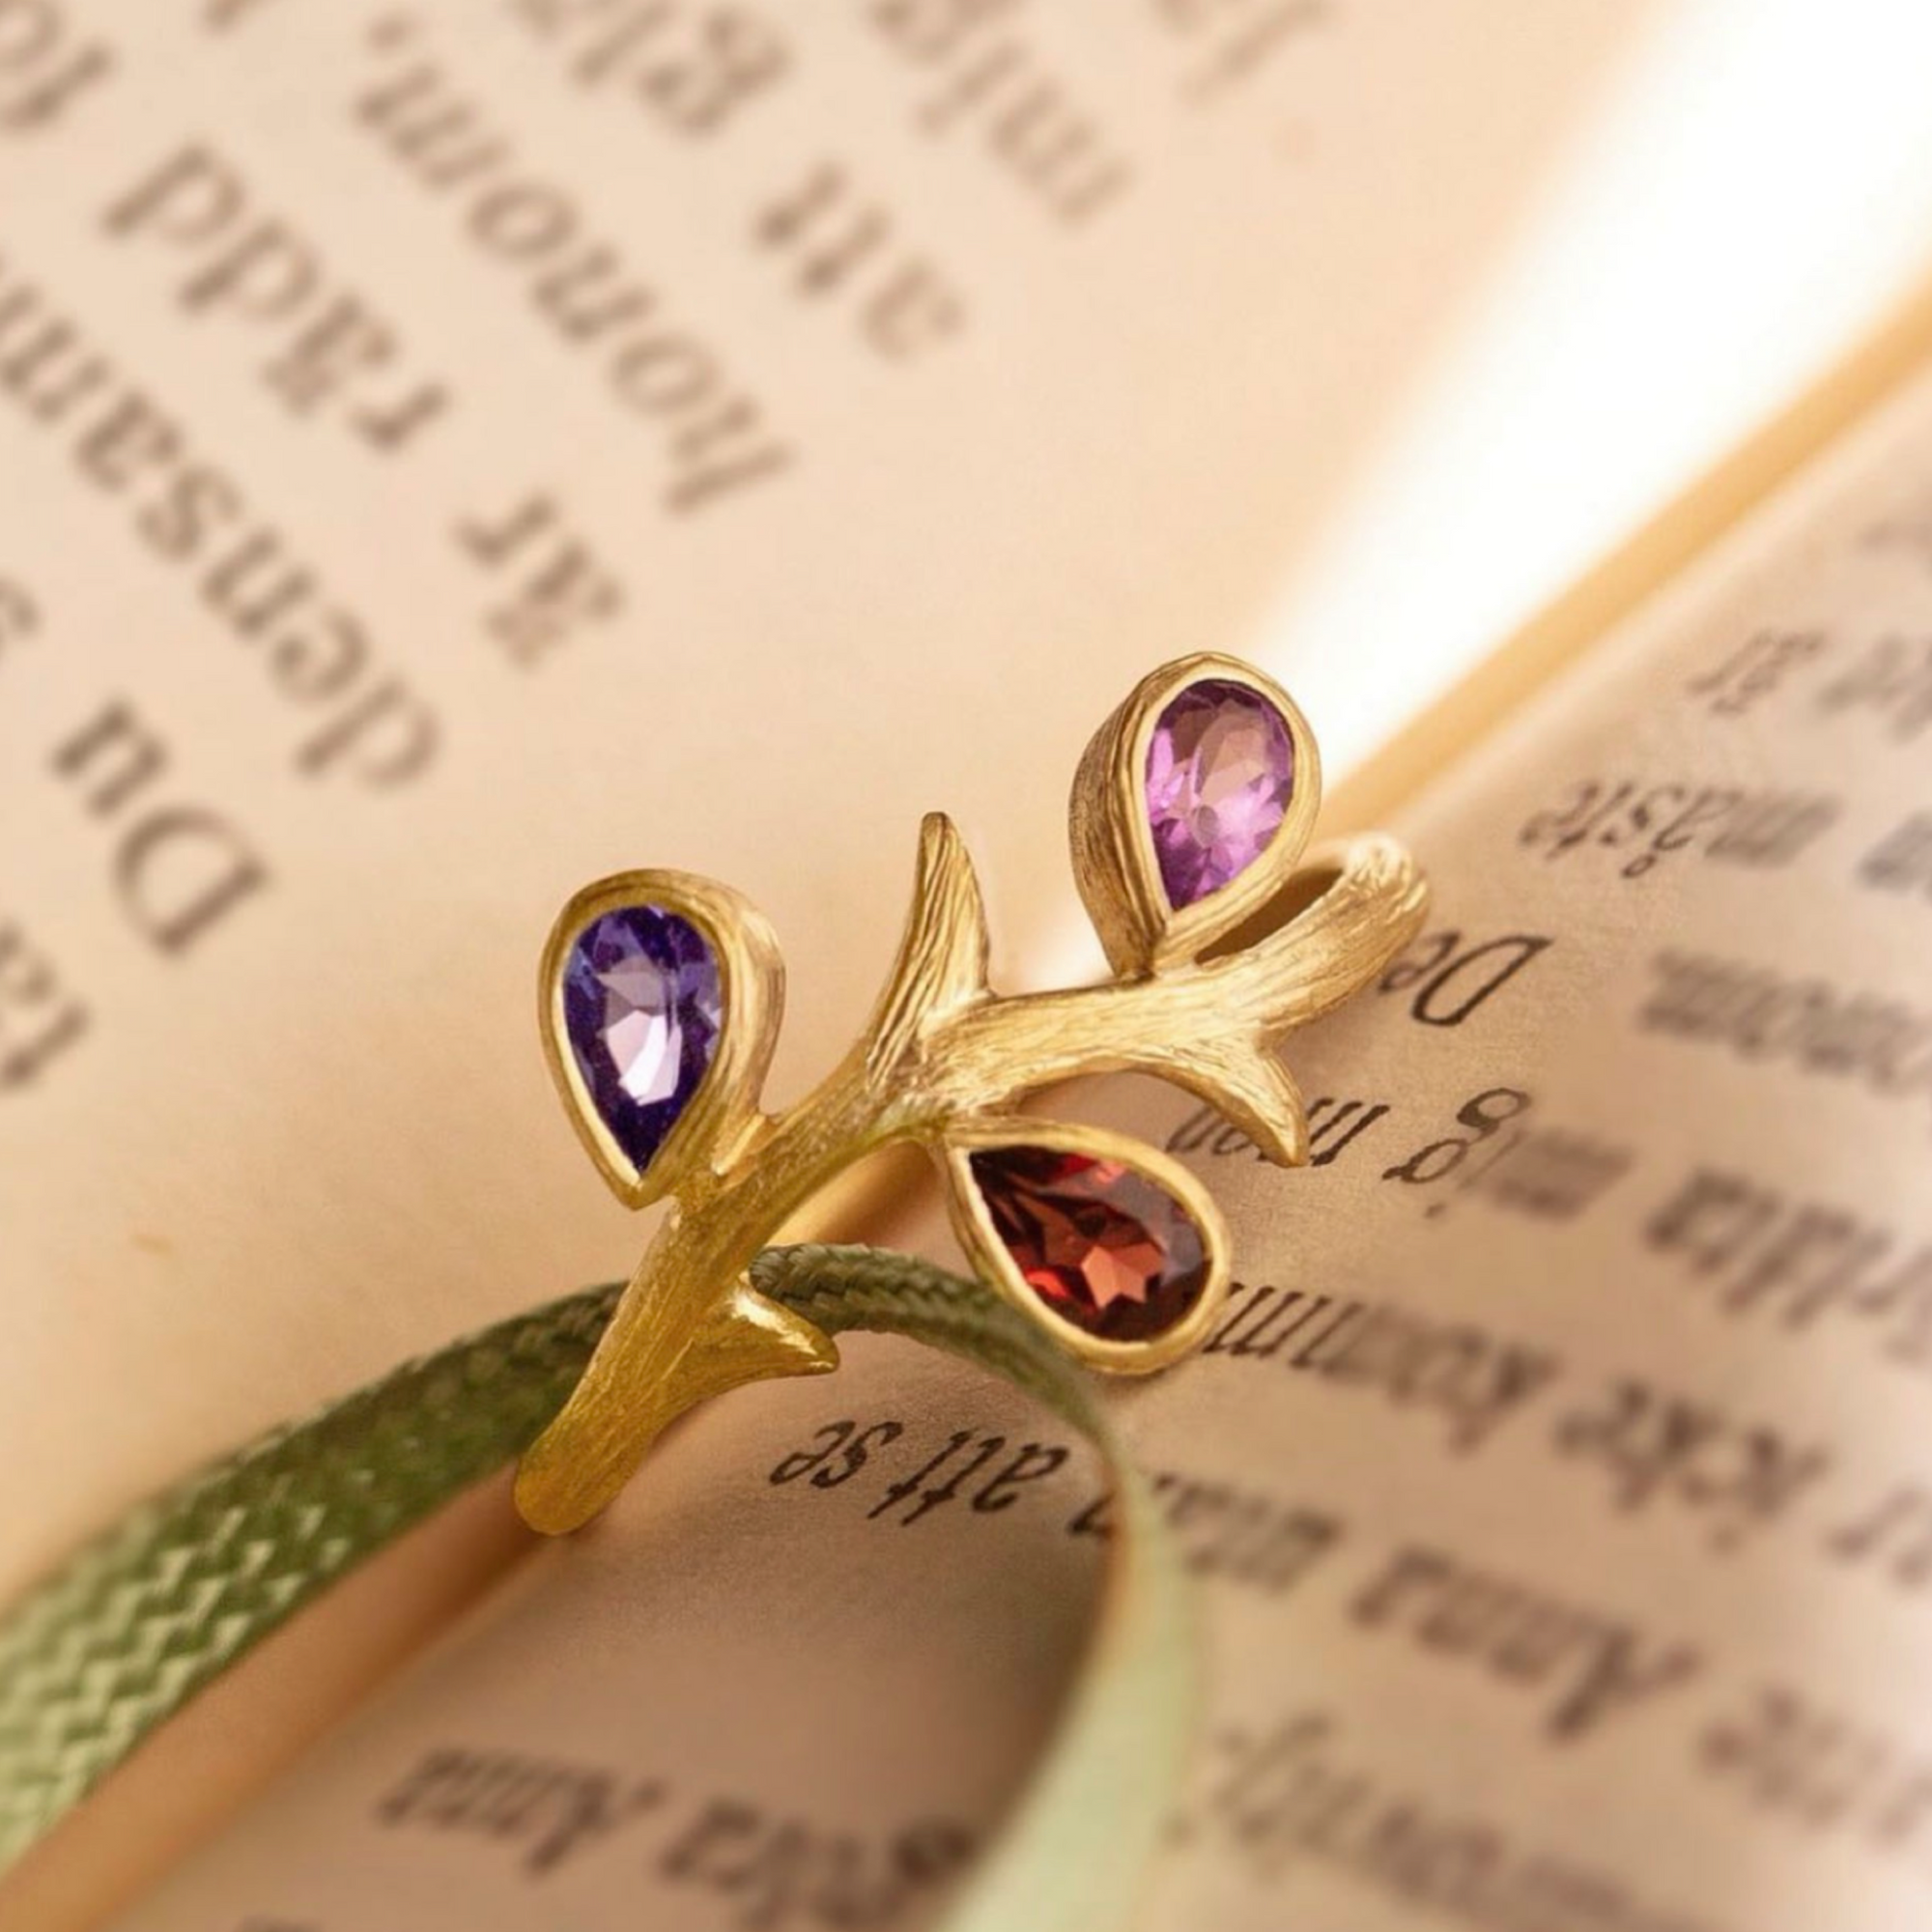 Vine Multi-Color Ring by Laurie Kaiser available at Talisman Collection Fine Jewelers in El Dorado Hills, CA and online. This delicate 18k yellow gold ring features three pear-shaped gems arranged on a vine inspired band. The stones - tanzanite, garnet, and amethyst - complement each other creating a perfect harmony of colors.